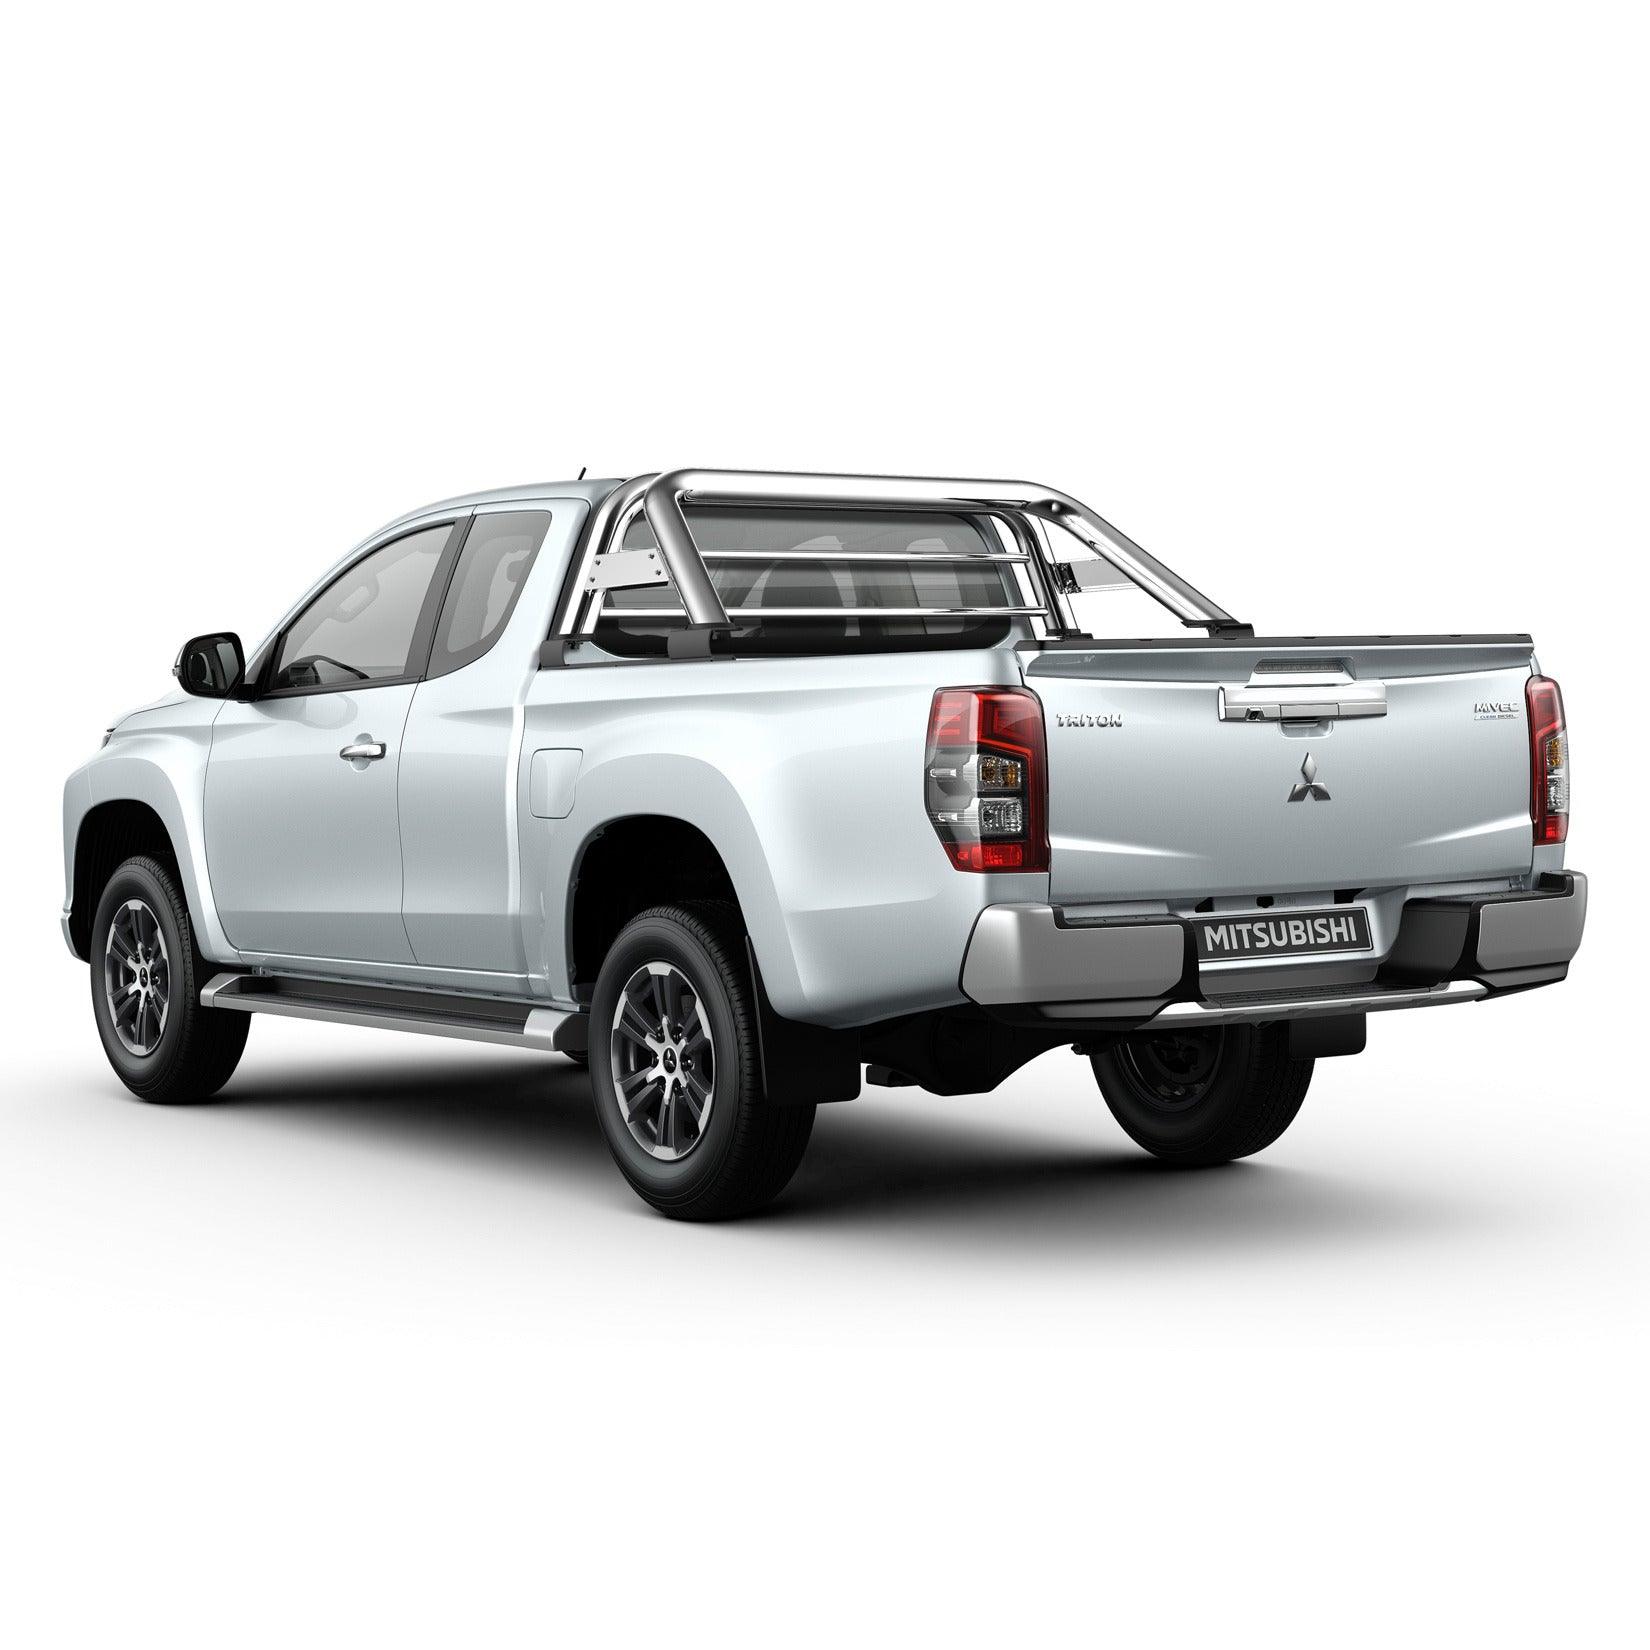 MITSUBISHI L200 SERIES 5 &amp; 6 2016 ON STAINLESS STEEL SX ROLL BAR - Storm Xccessories2